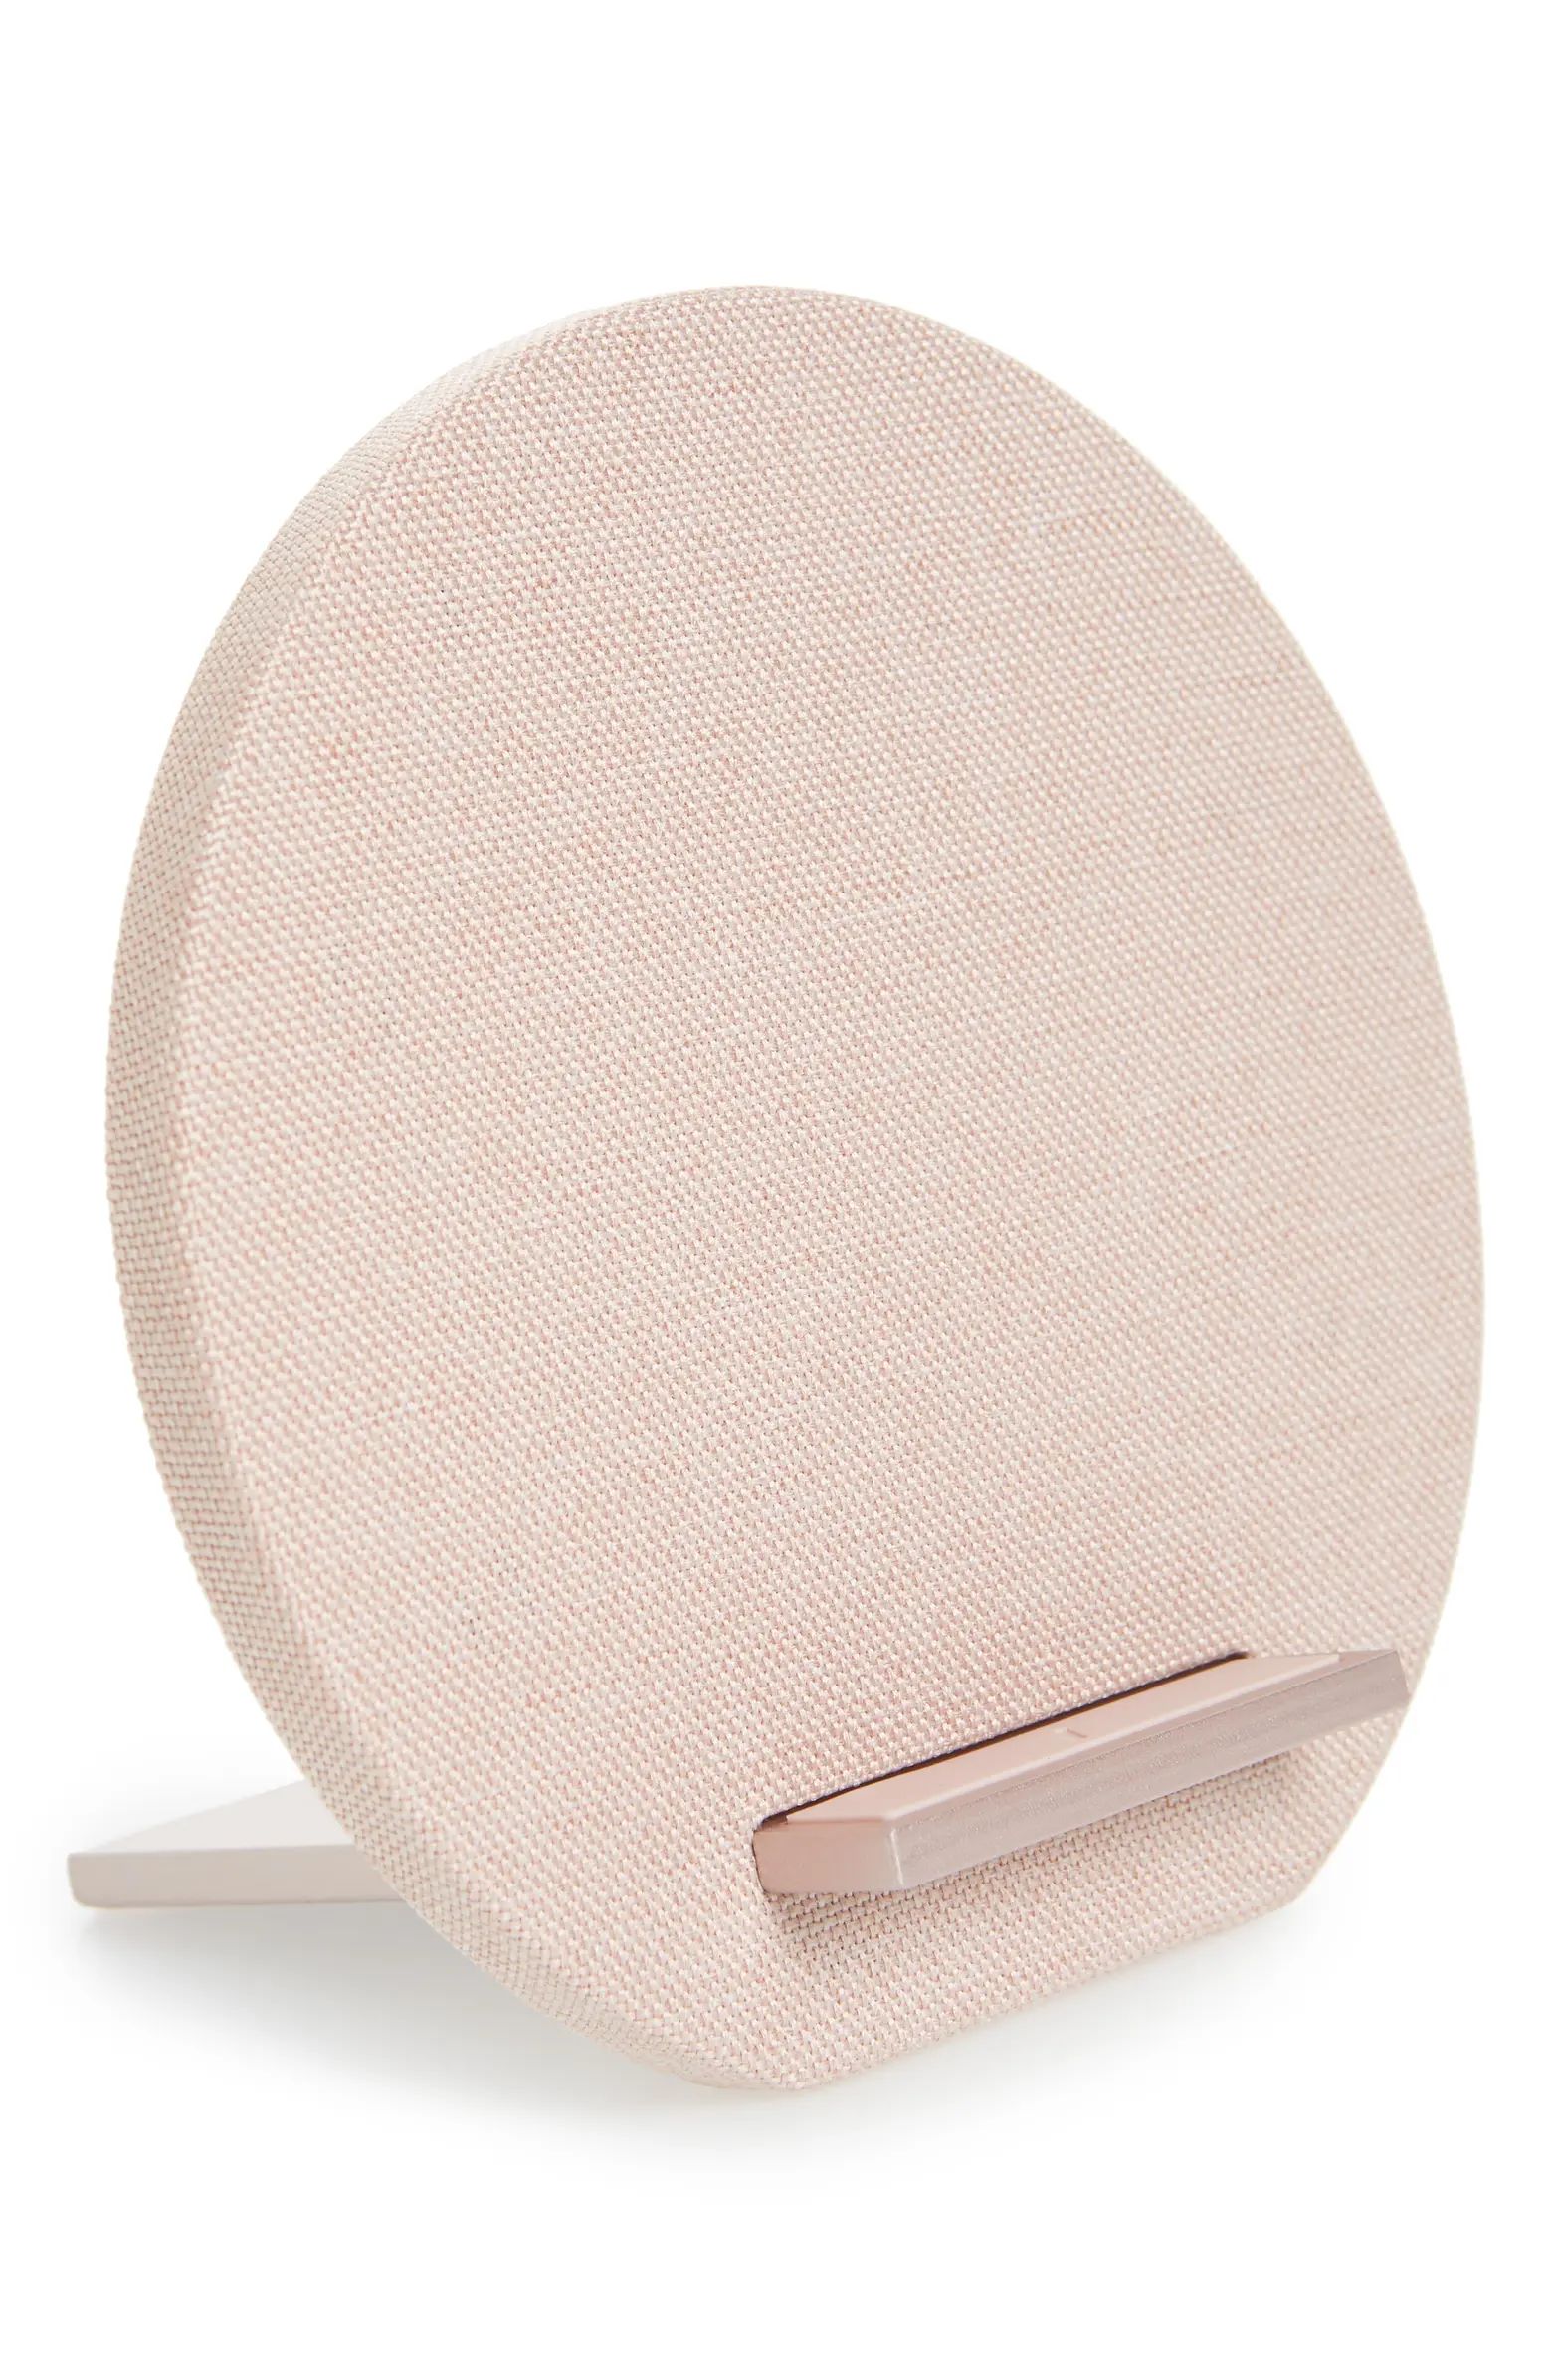 Dock Wireless Charger | Nordstrom